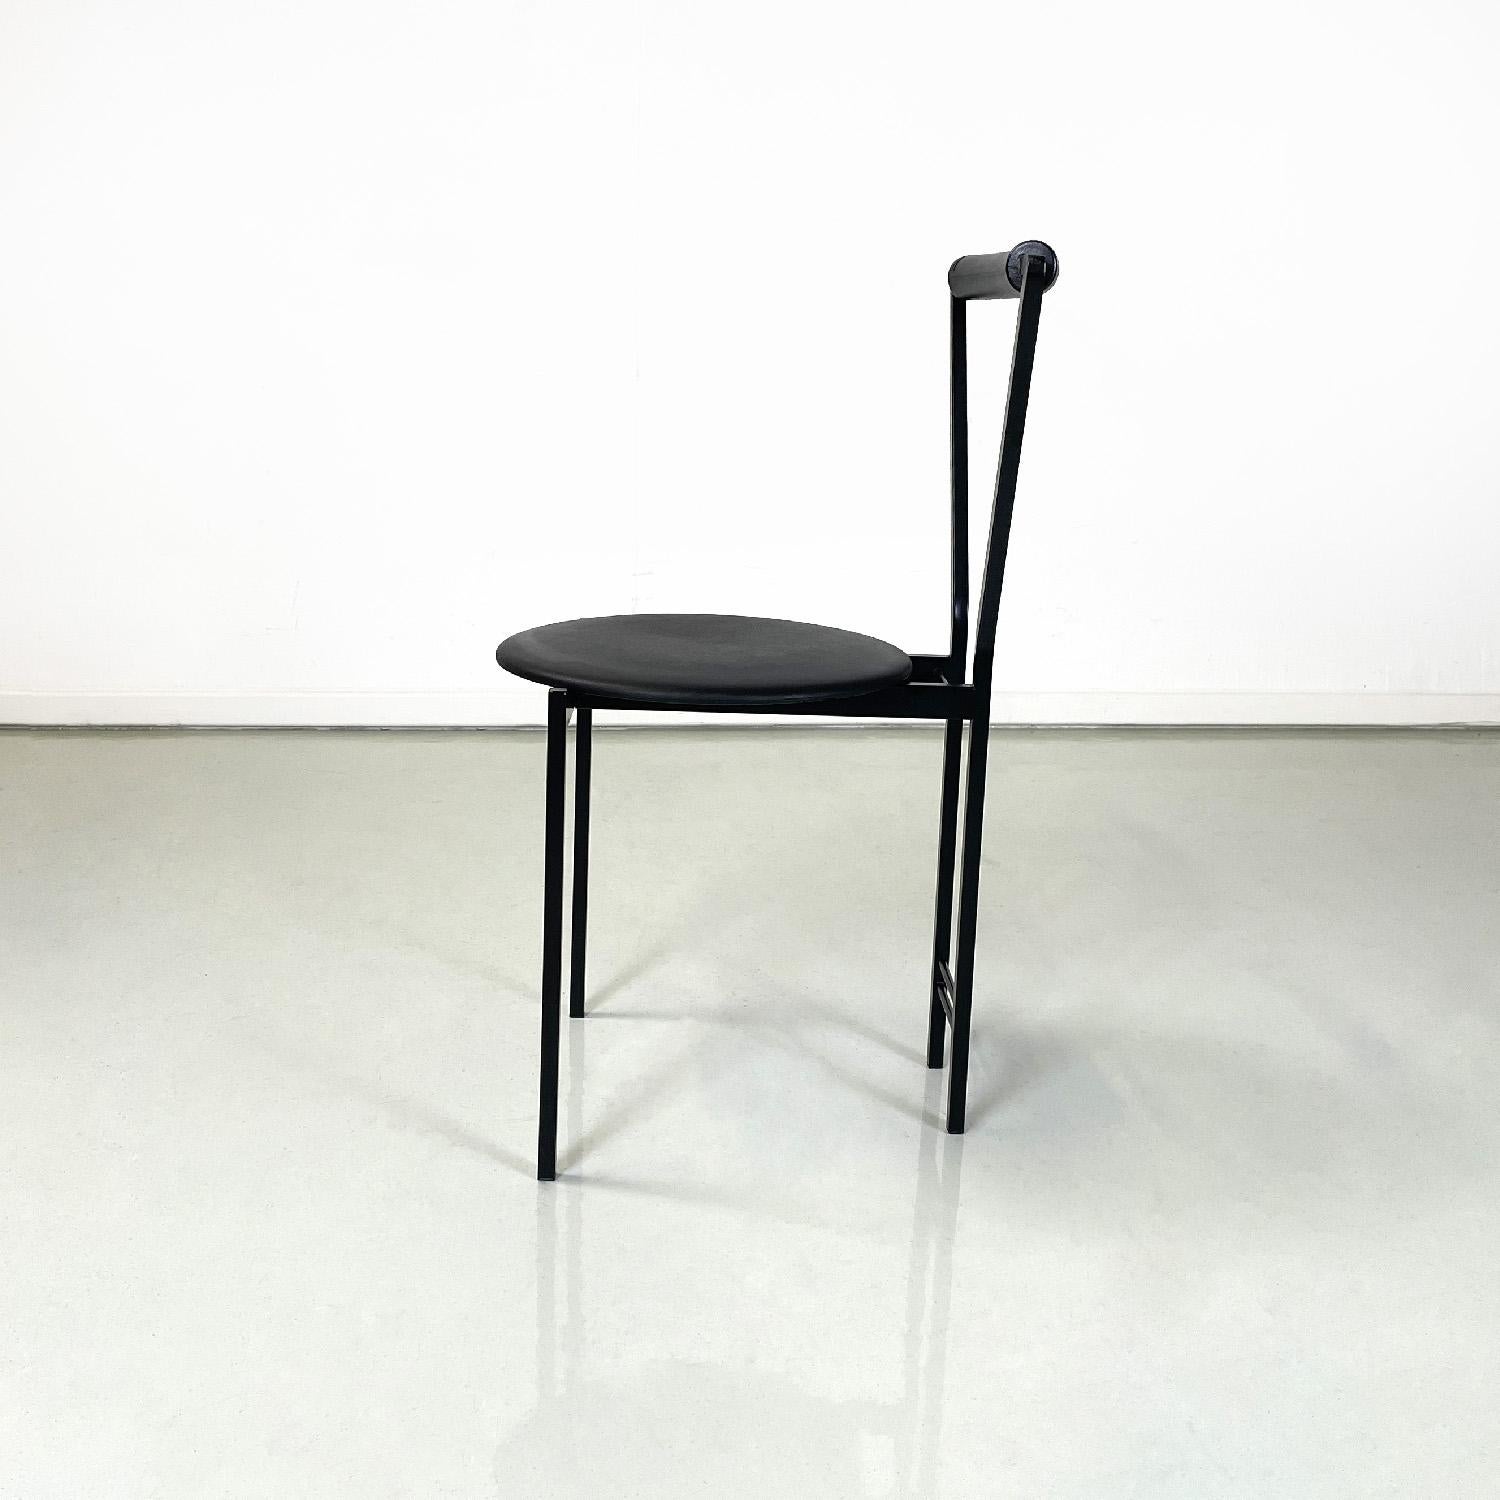 Late 20th Century Italian modern chairs in black metal and rubber, 1980s For Sale